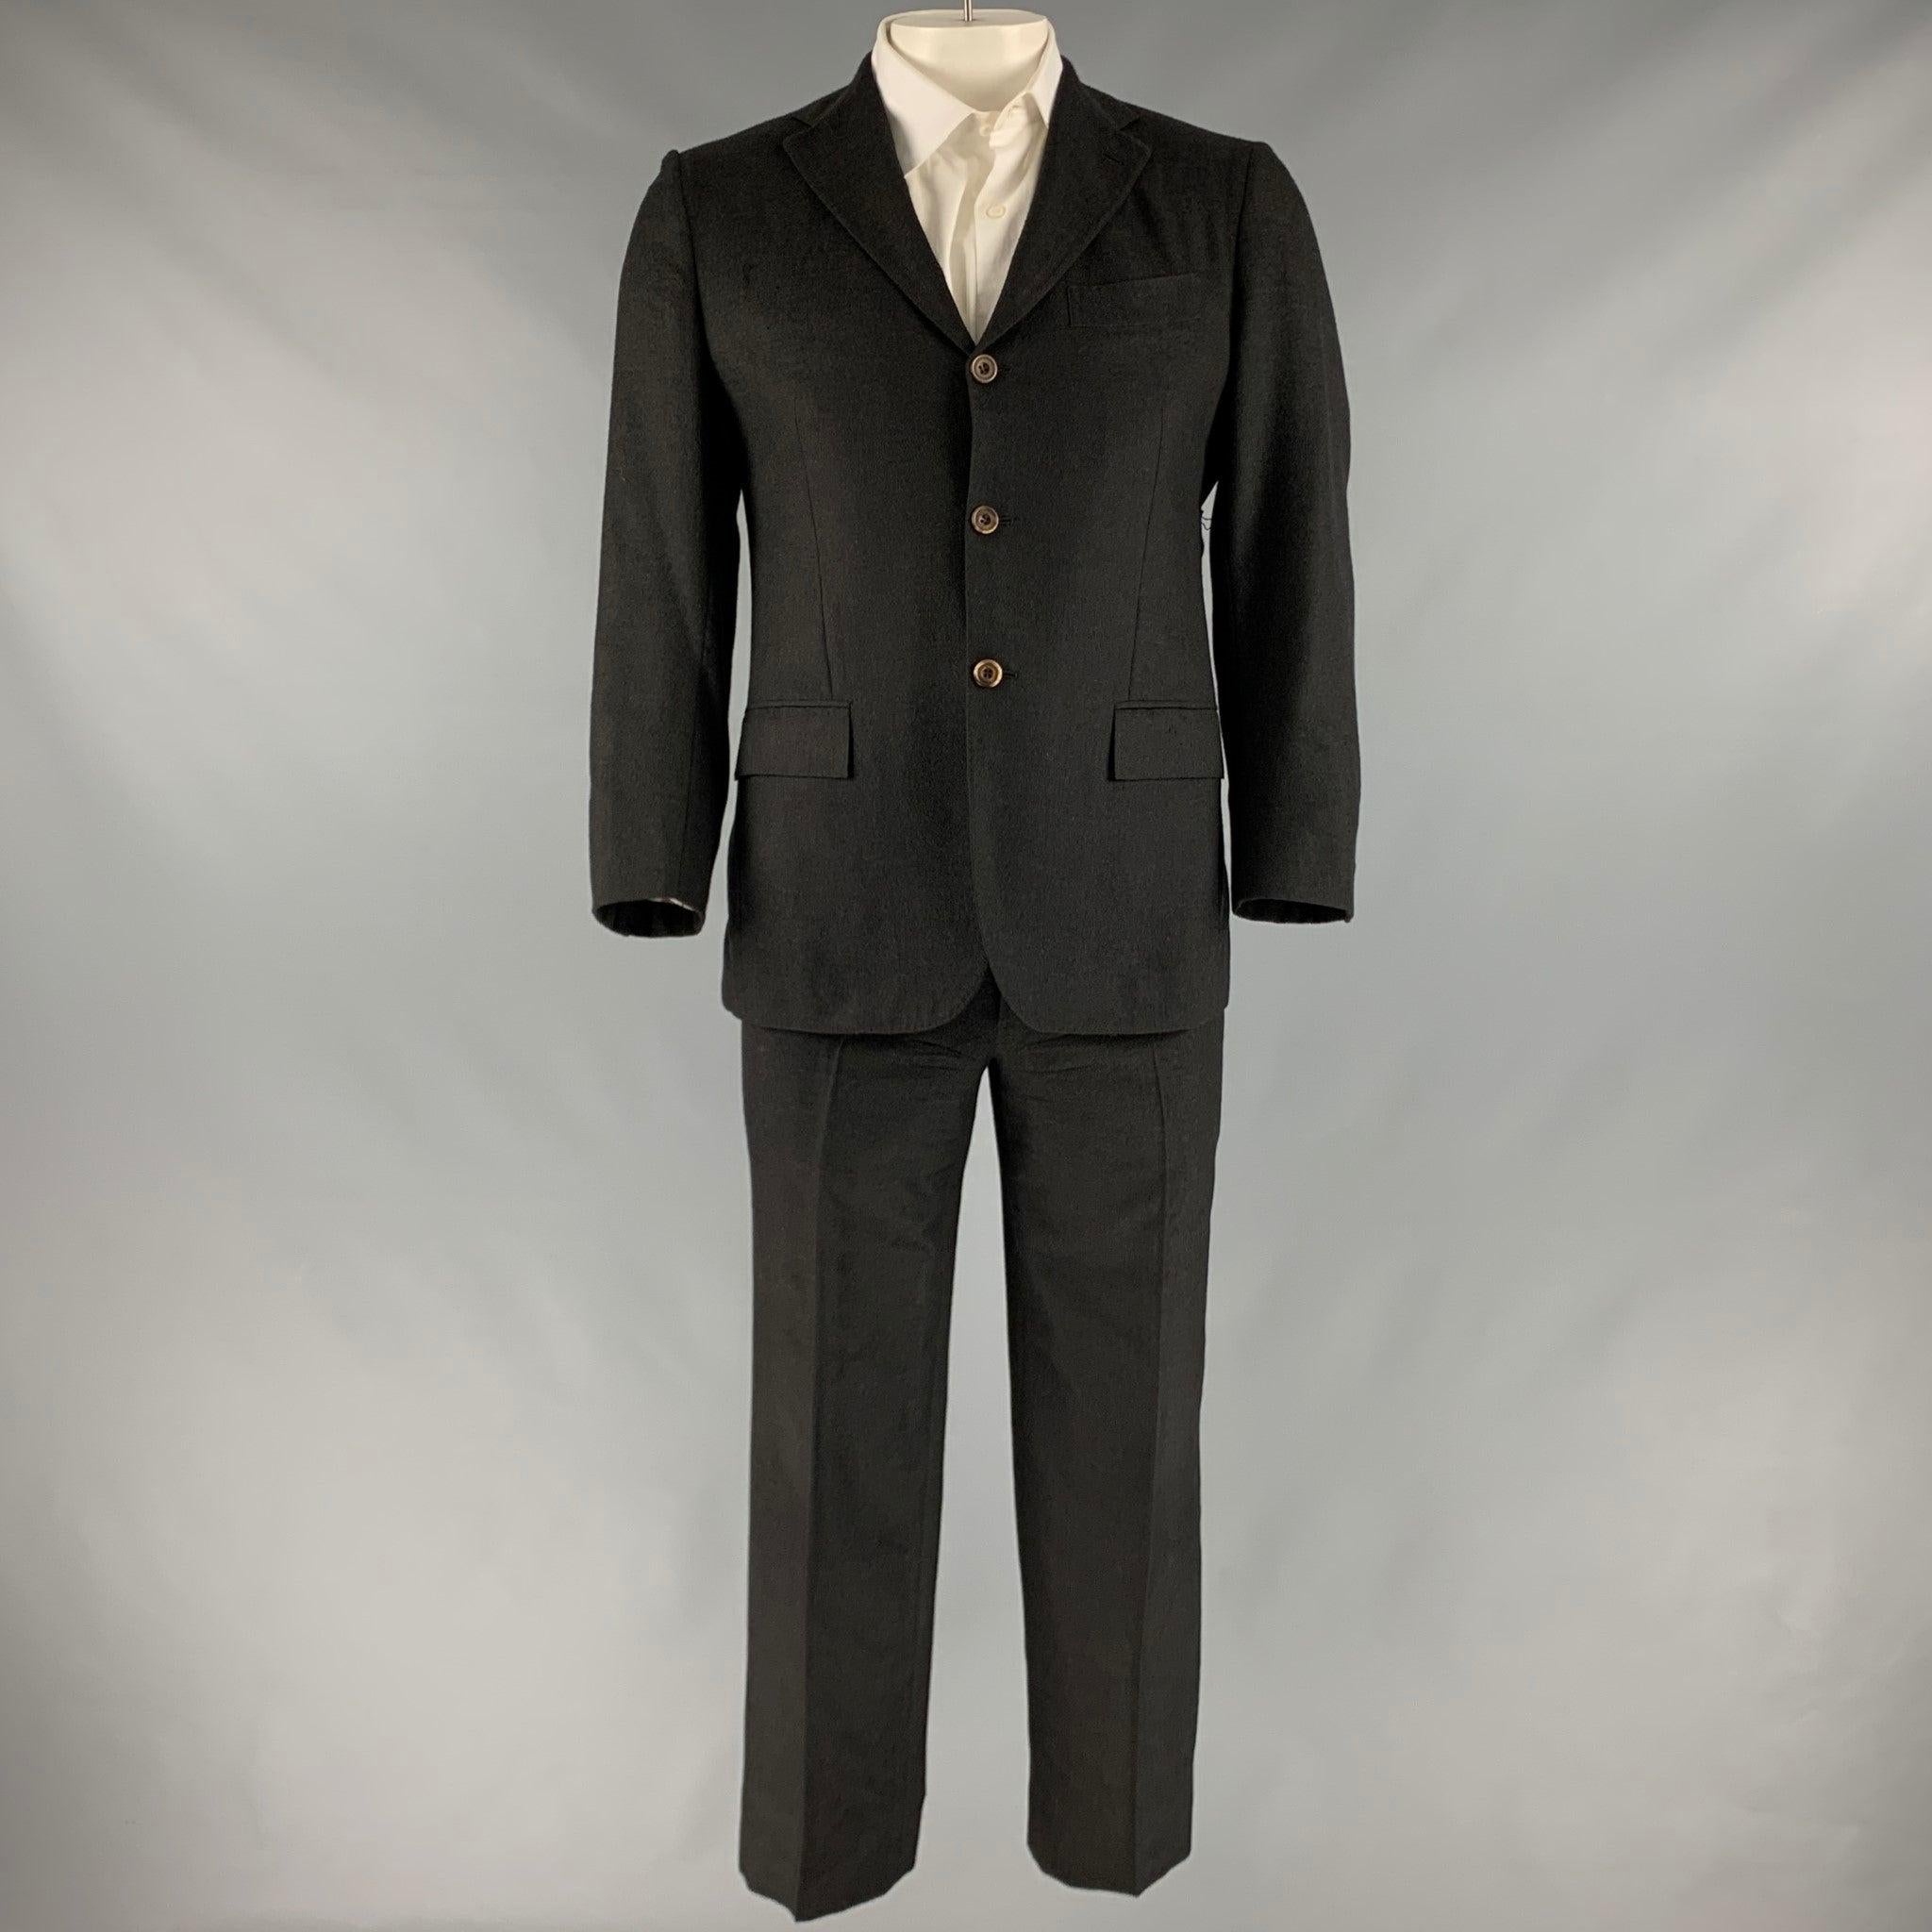 KITON for WILKES BASHFORD suit
in a grey cashmere with a full liner and includes a single breasted, three button sport coat with notch lapel and matching flat front trousers.Very Good Pre-Owned Condition. Custom made, as is. 

Marked:   45